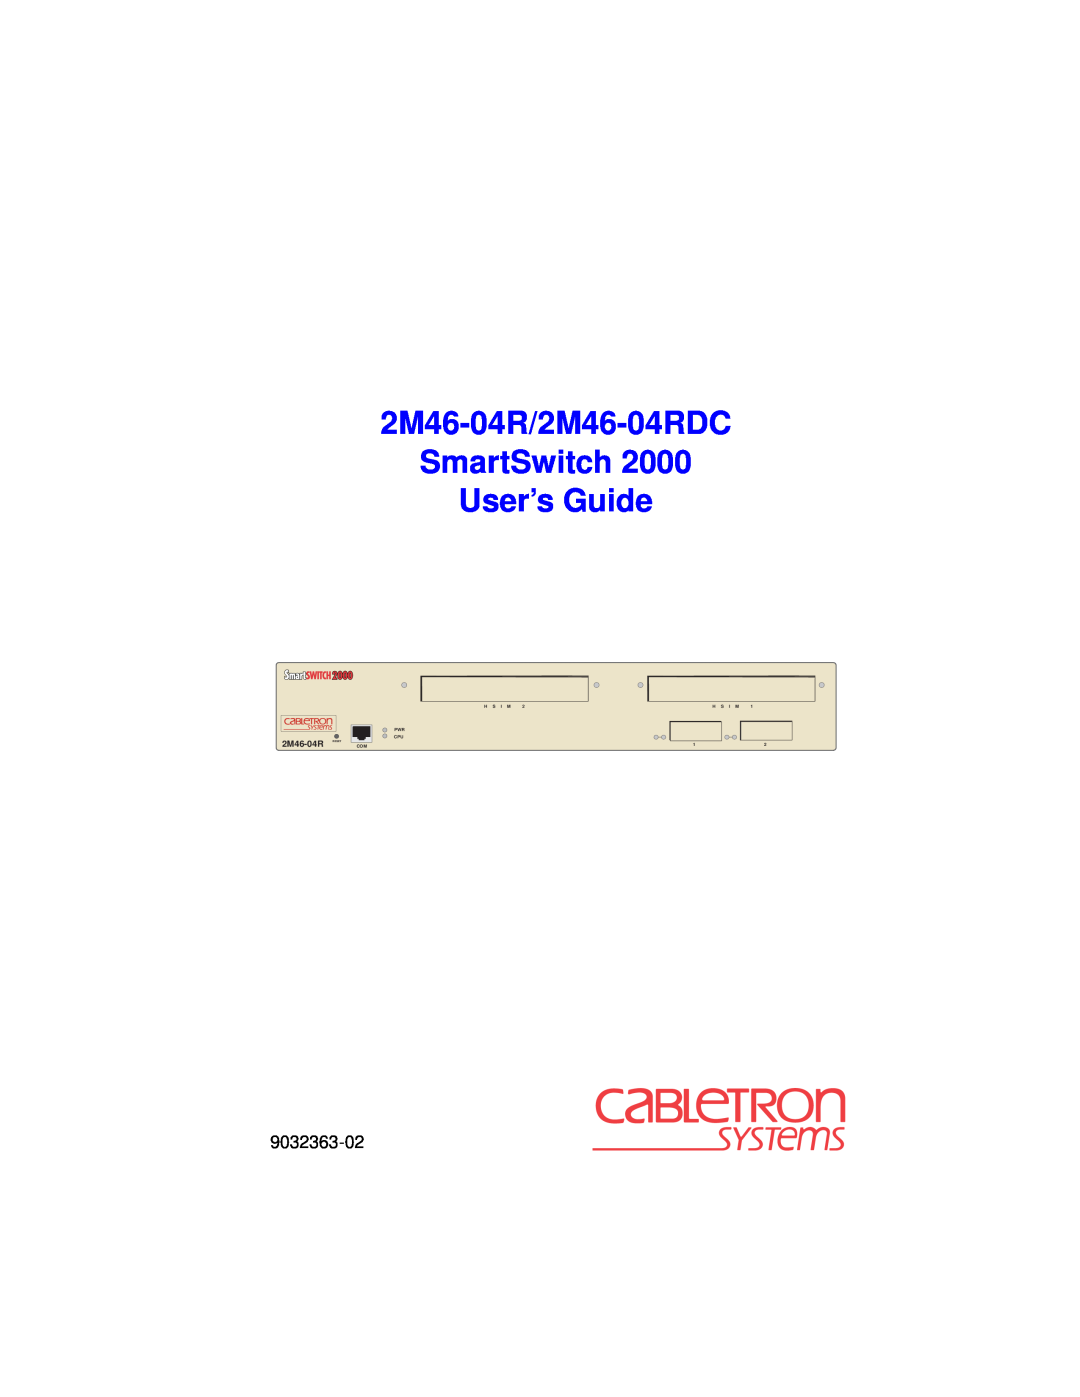 Cabletron Systems pmn manual 2M46-04R/2M46-04RDC SmartSwitch User’s Guide, 9032363-02, 2M46-04R RESETCOM, H S I M 